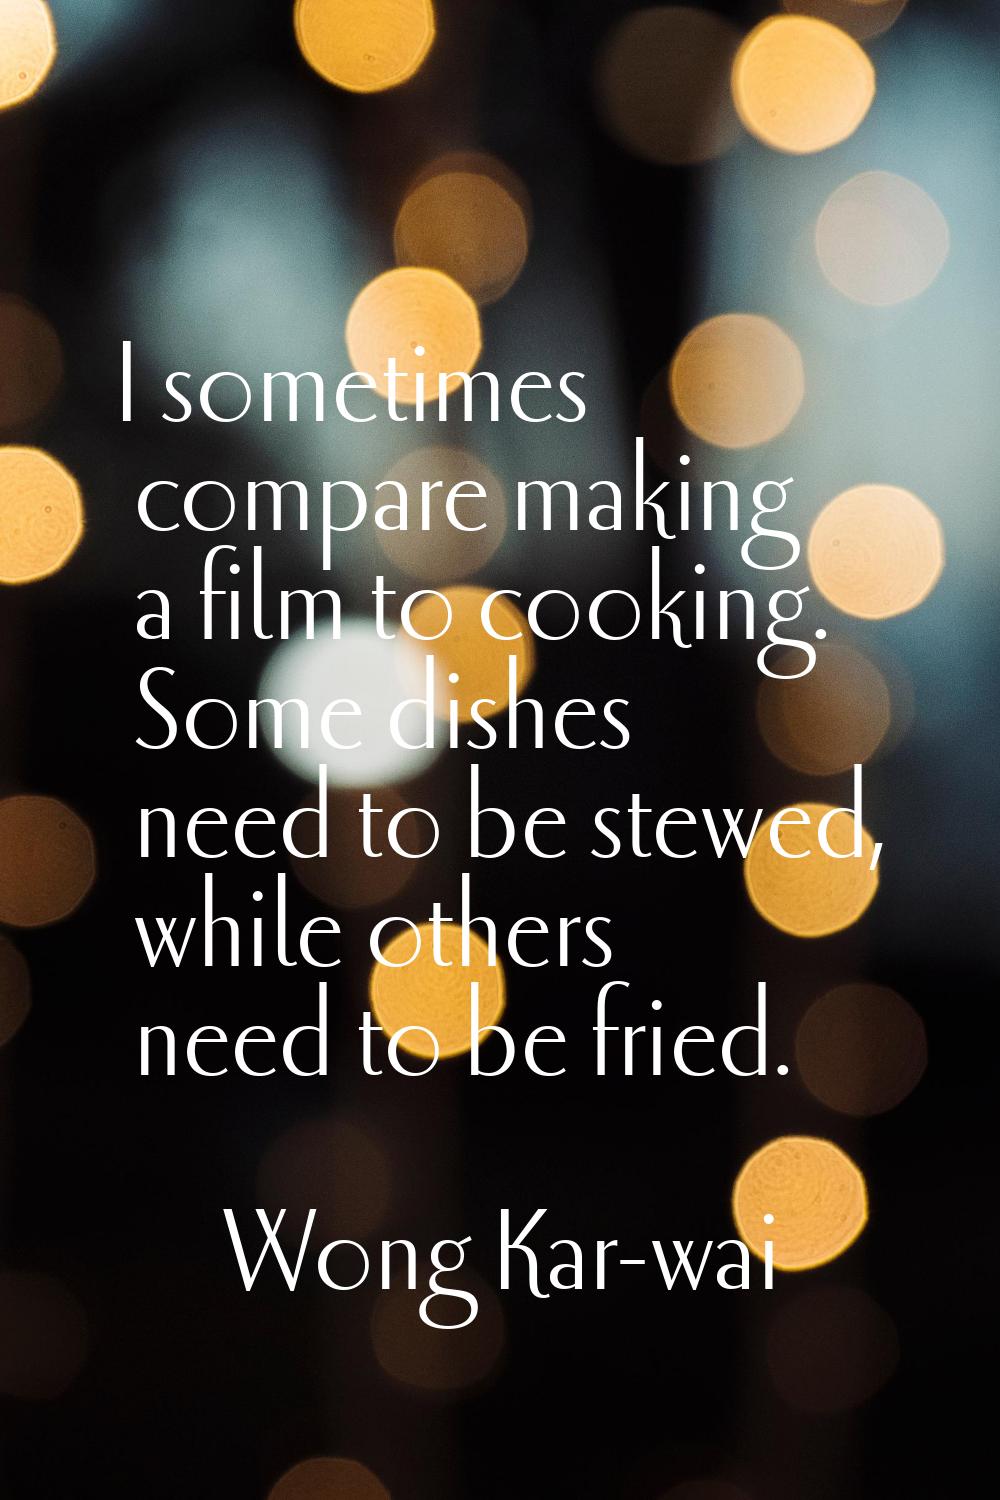 I sometimes compare making a film to cooking. Some dishes need to be stewed, while others need to b